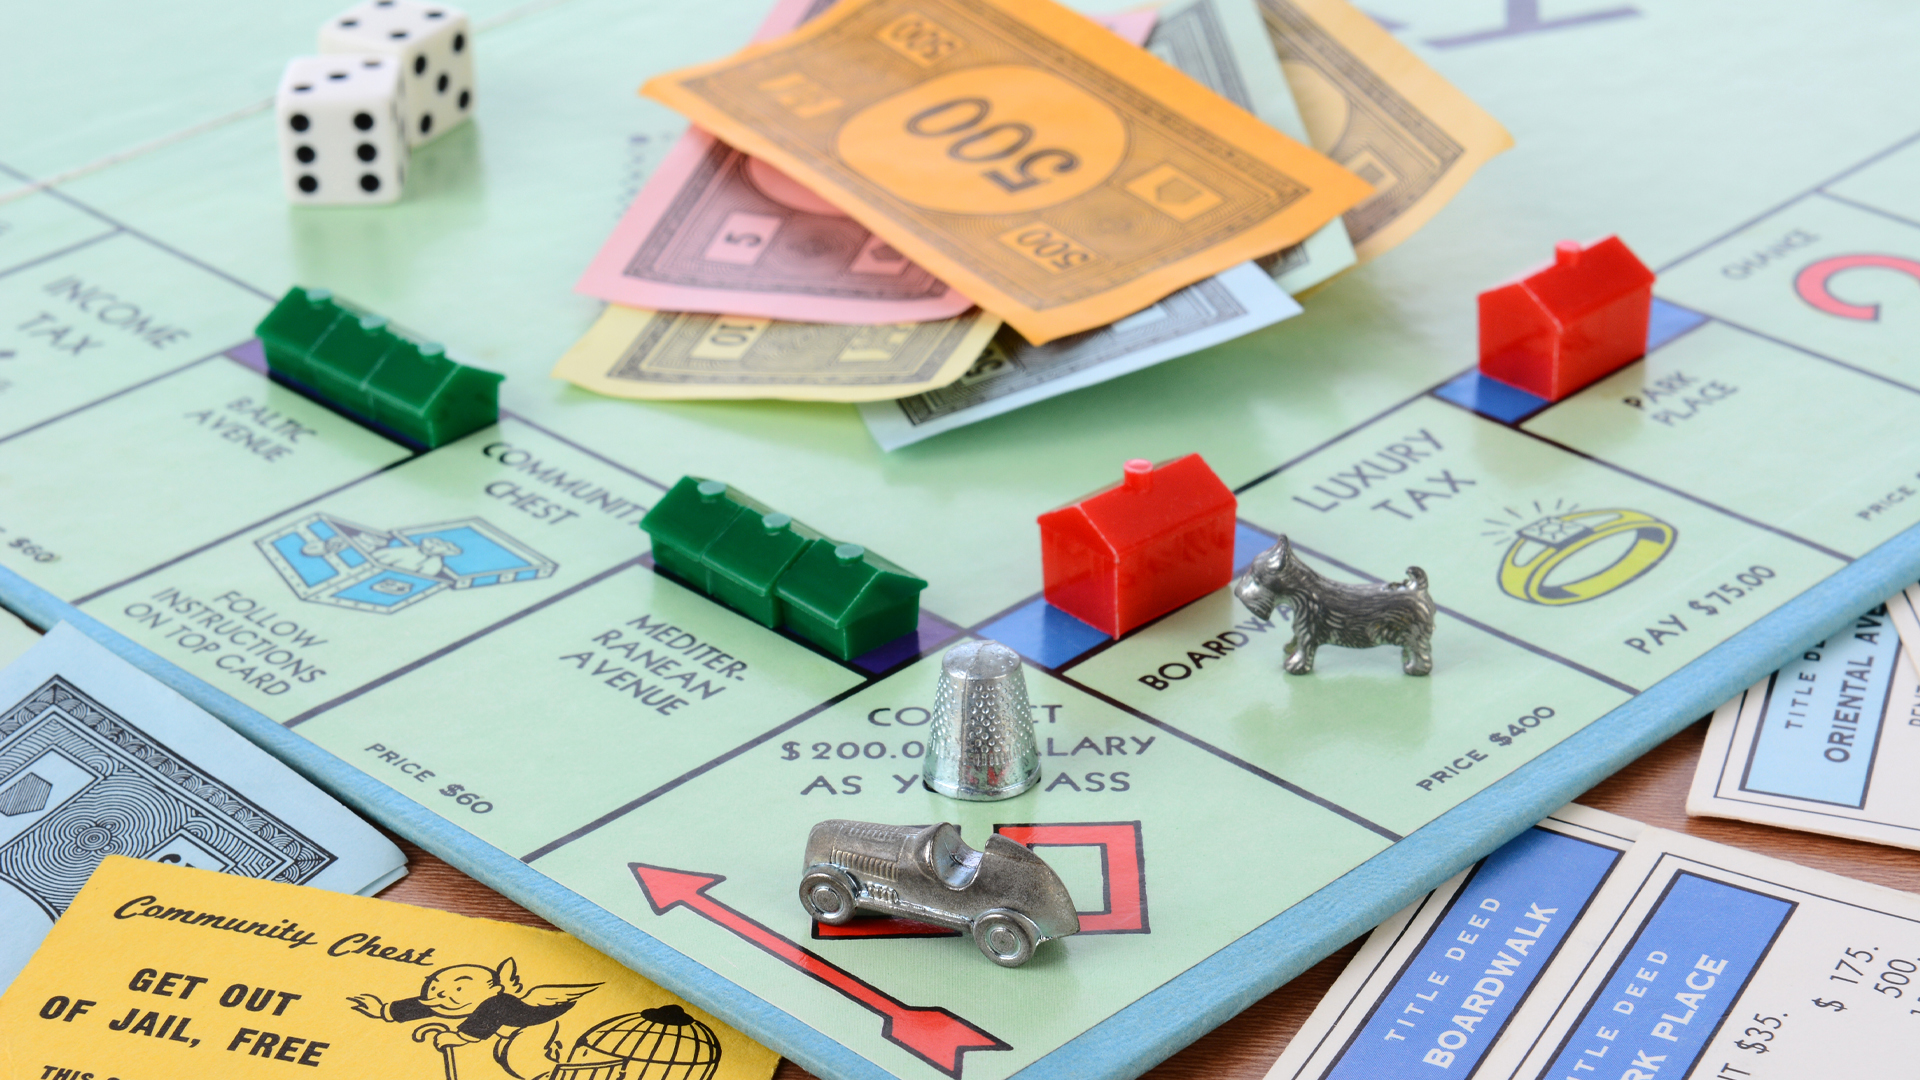 monopoly like games online